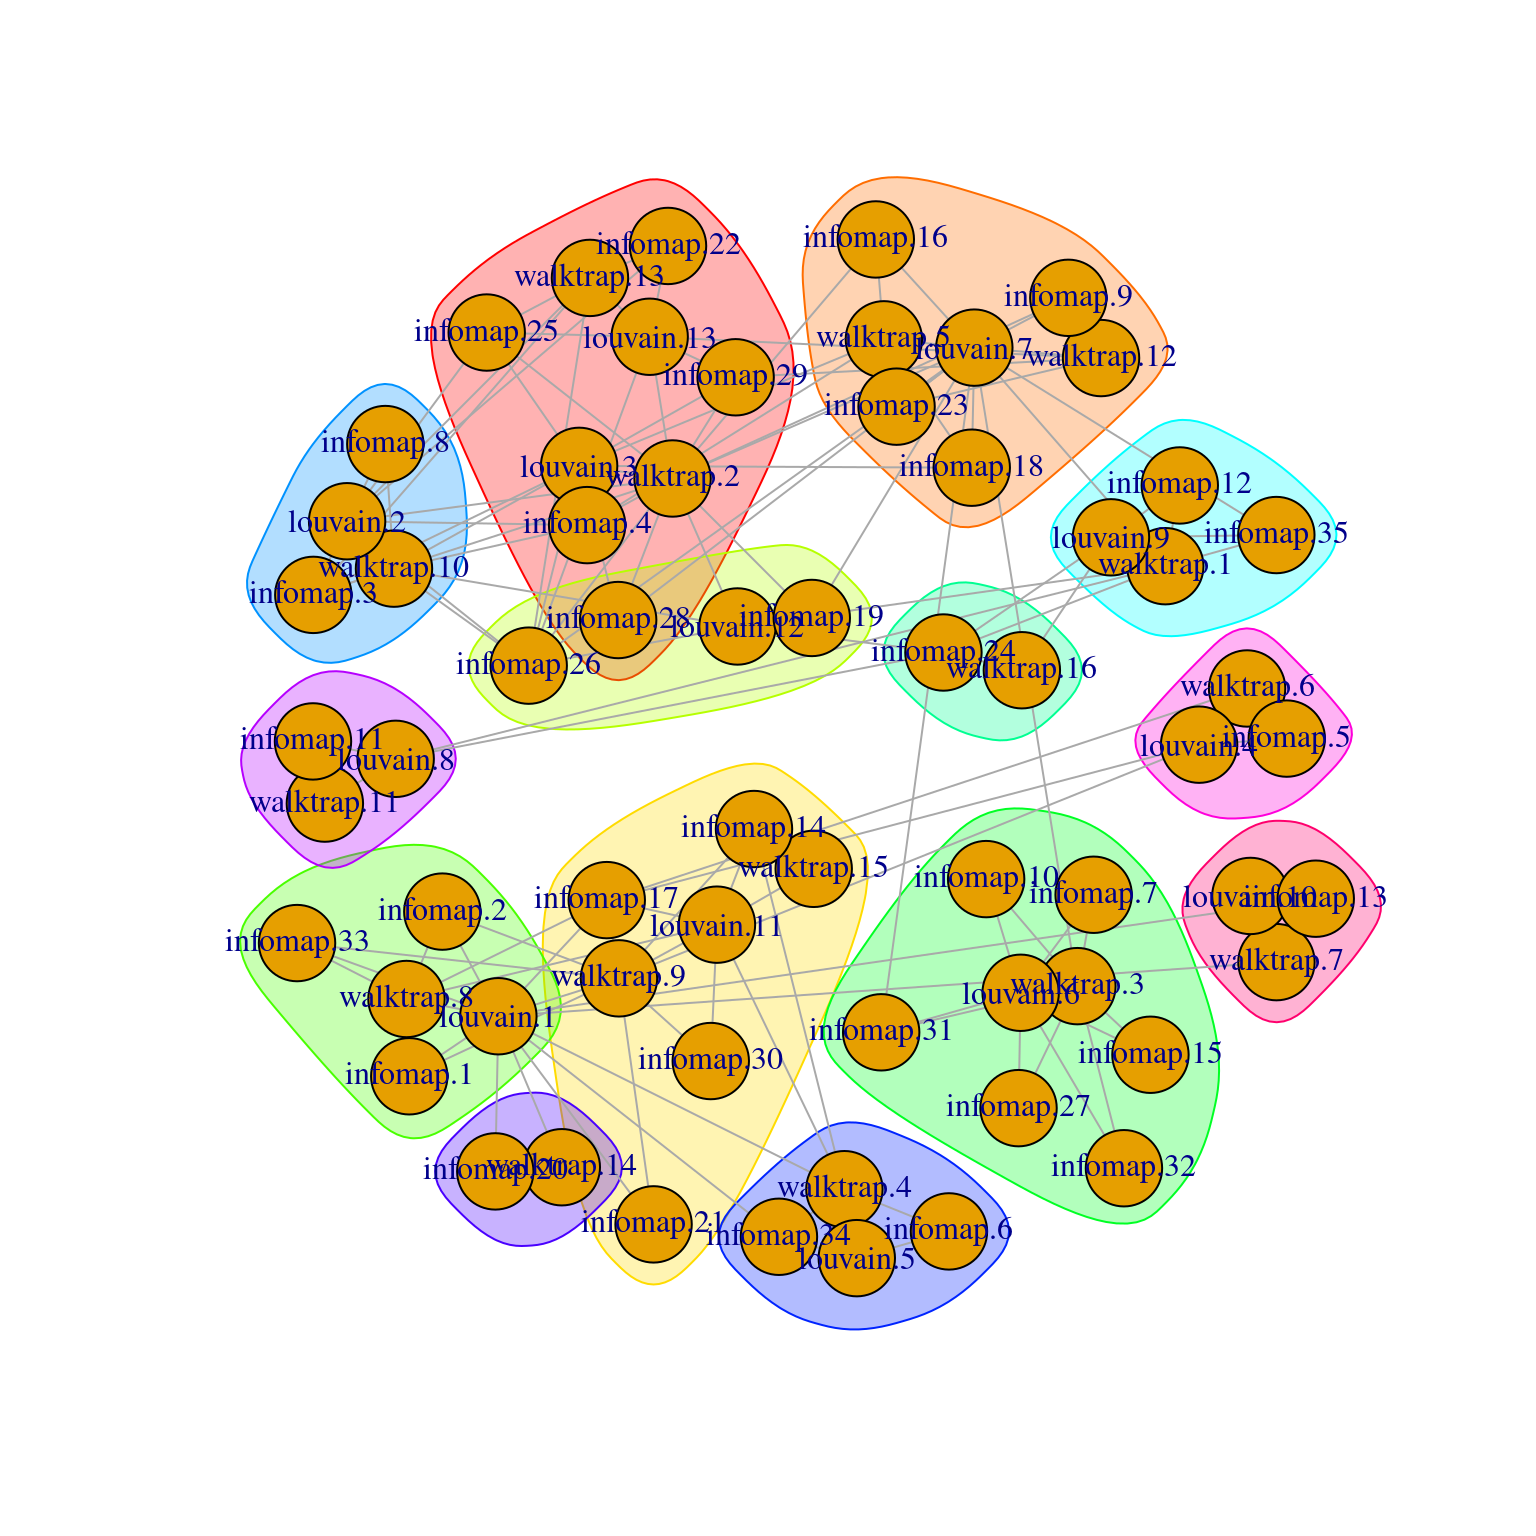 Force-directed layout of the graph of the clusters obtained from different variants of community detection on the PBMC dataset. Each node represents a cluster obtained using one comunity detection method, with colored groupings representing clusters of clusters across different methods.